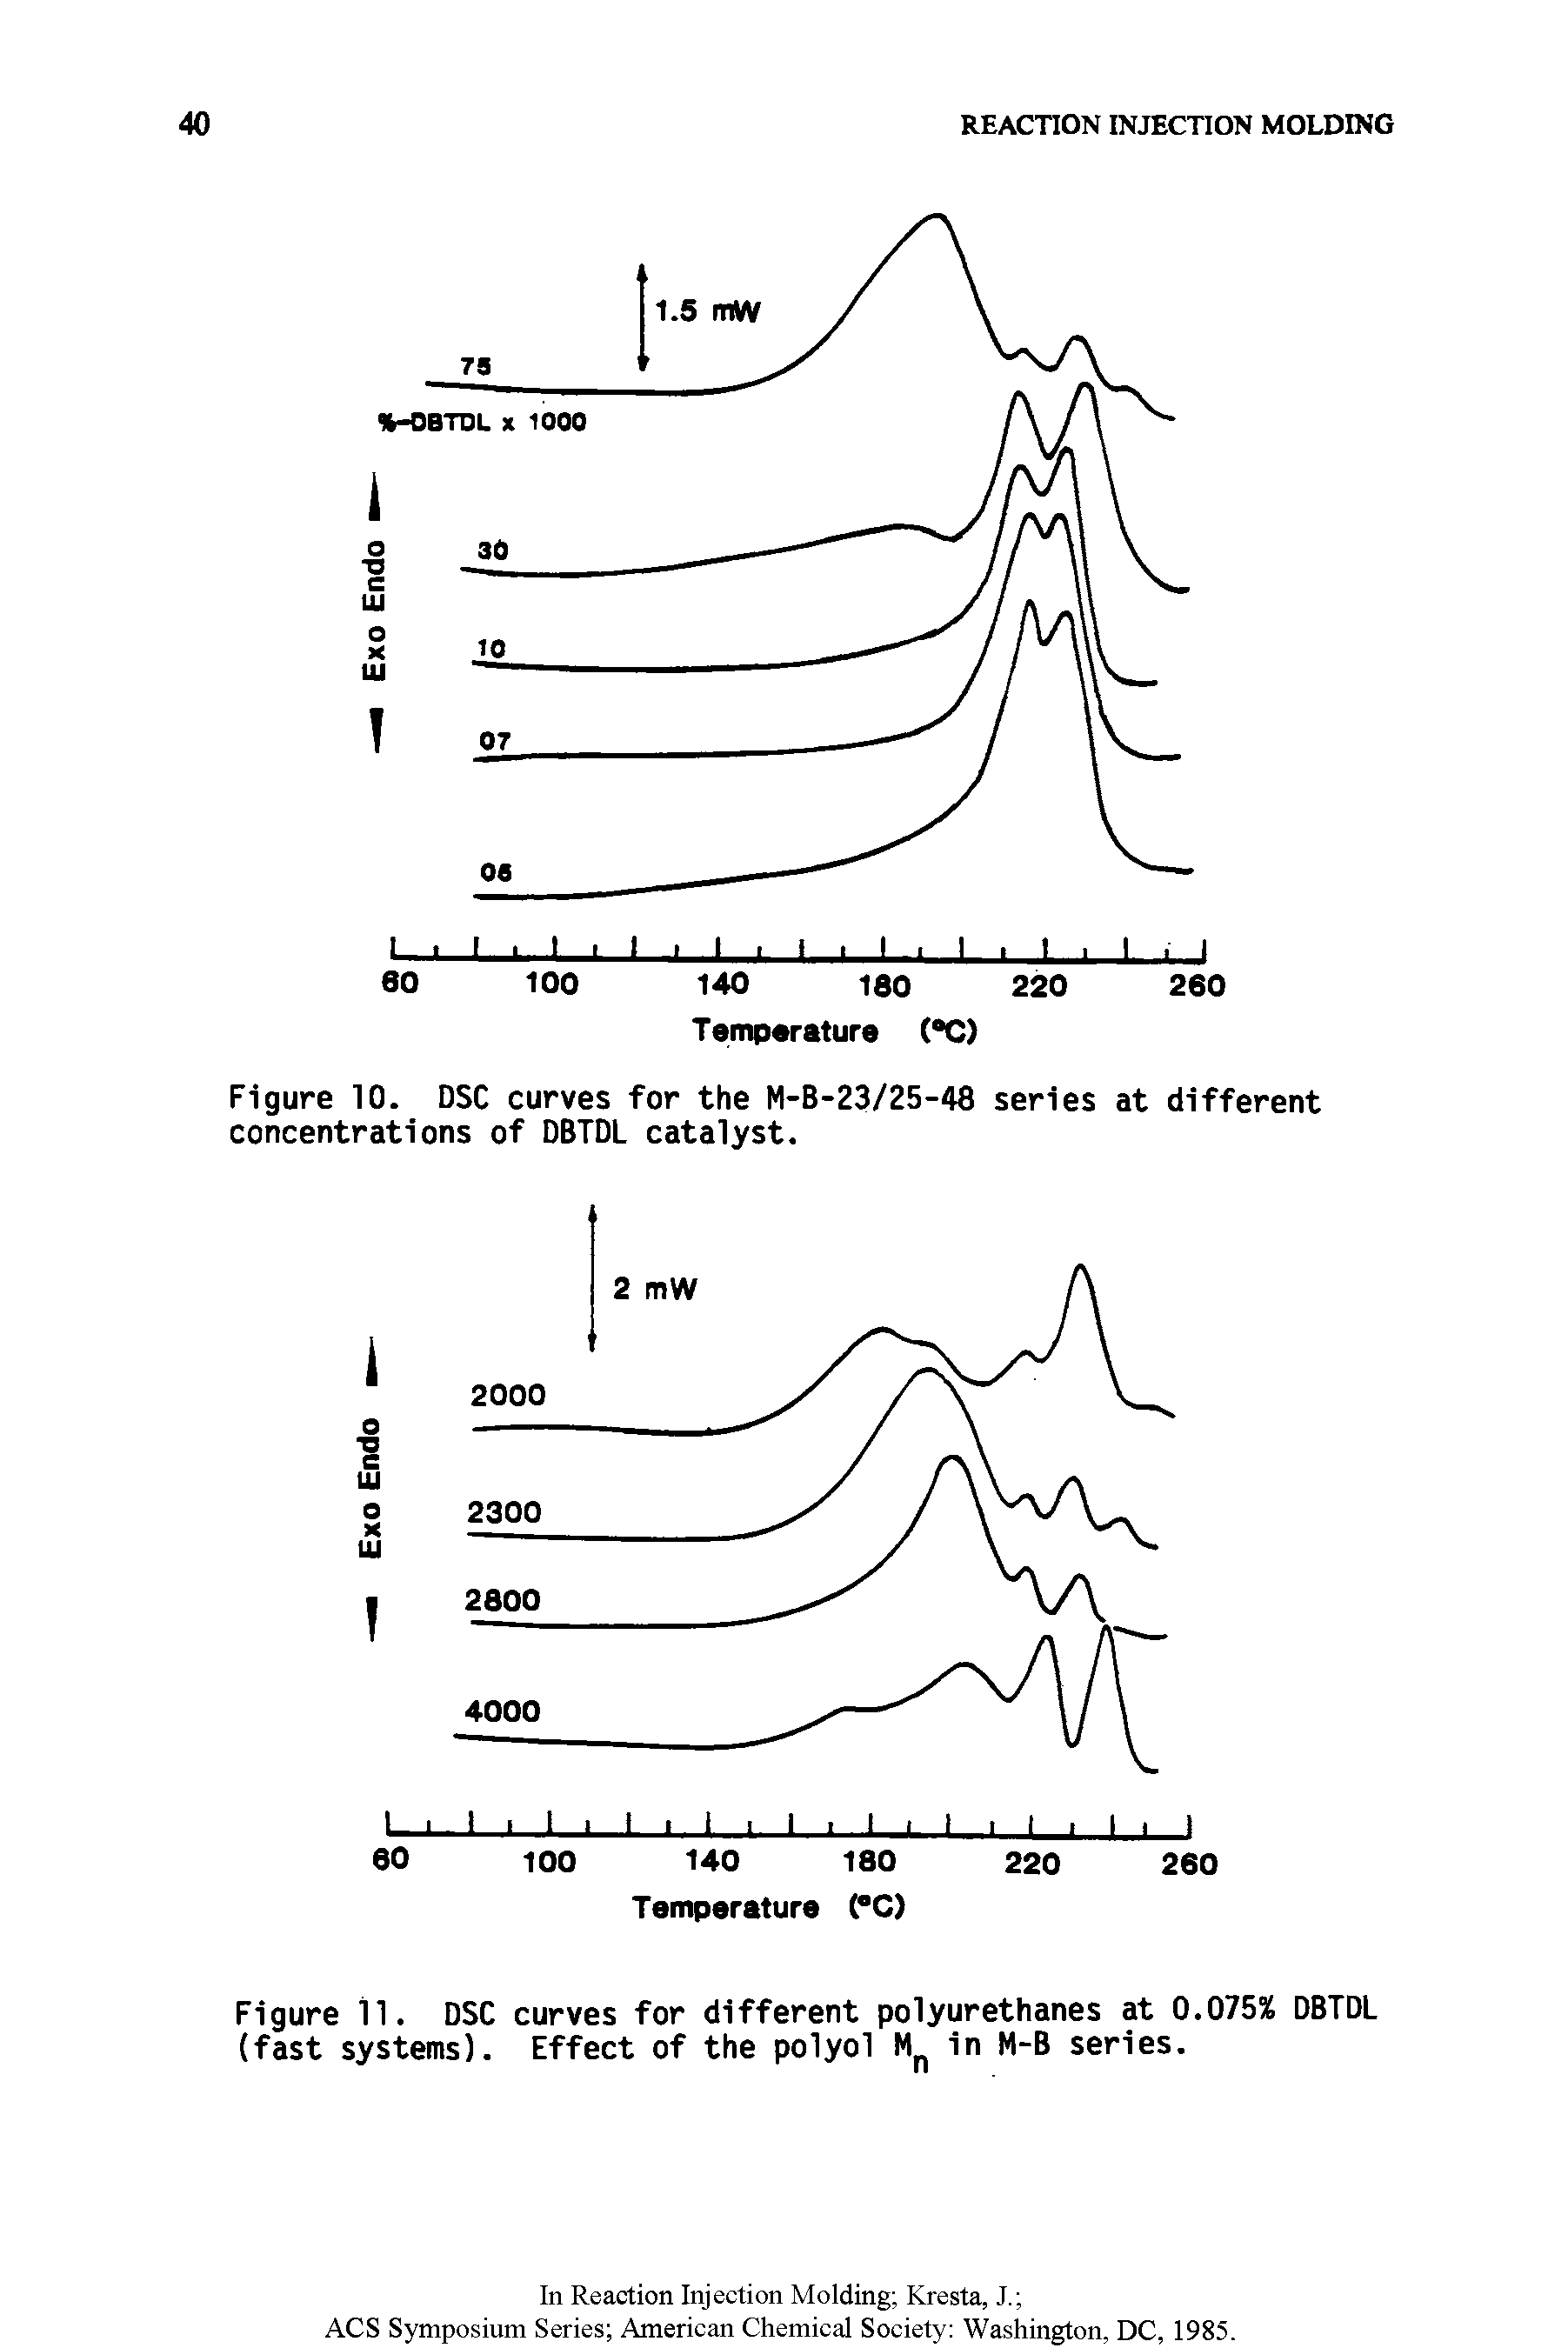 Figure 11. DSC curves for different polyurethanes at 0.075% DBTDL (fast systems). Effect of the polyol Mn in M-B series.